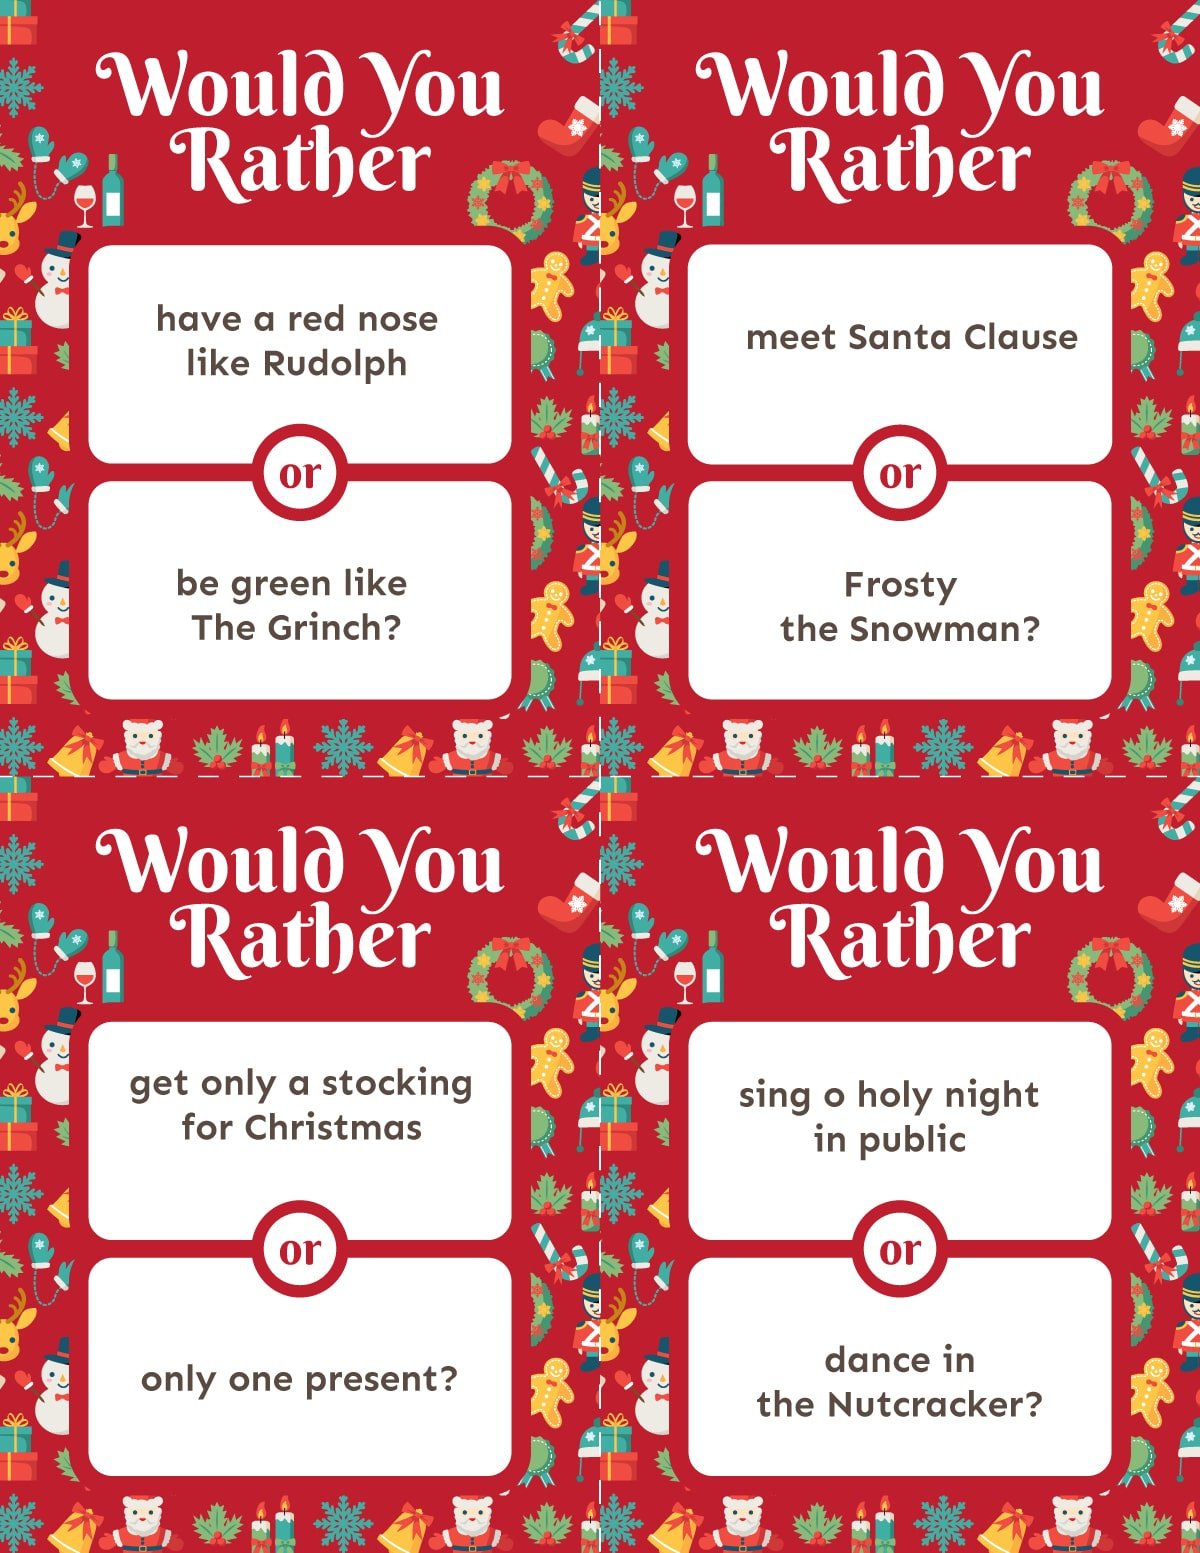 Christmas would you rather questions